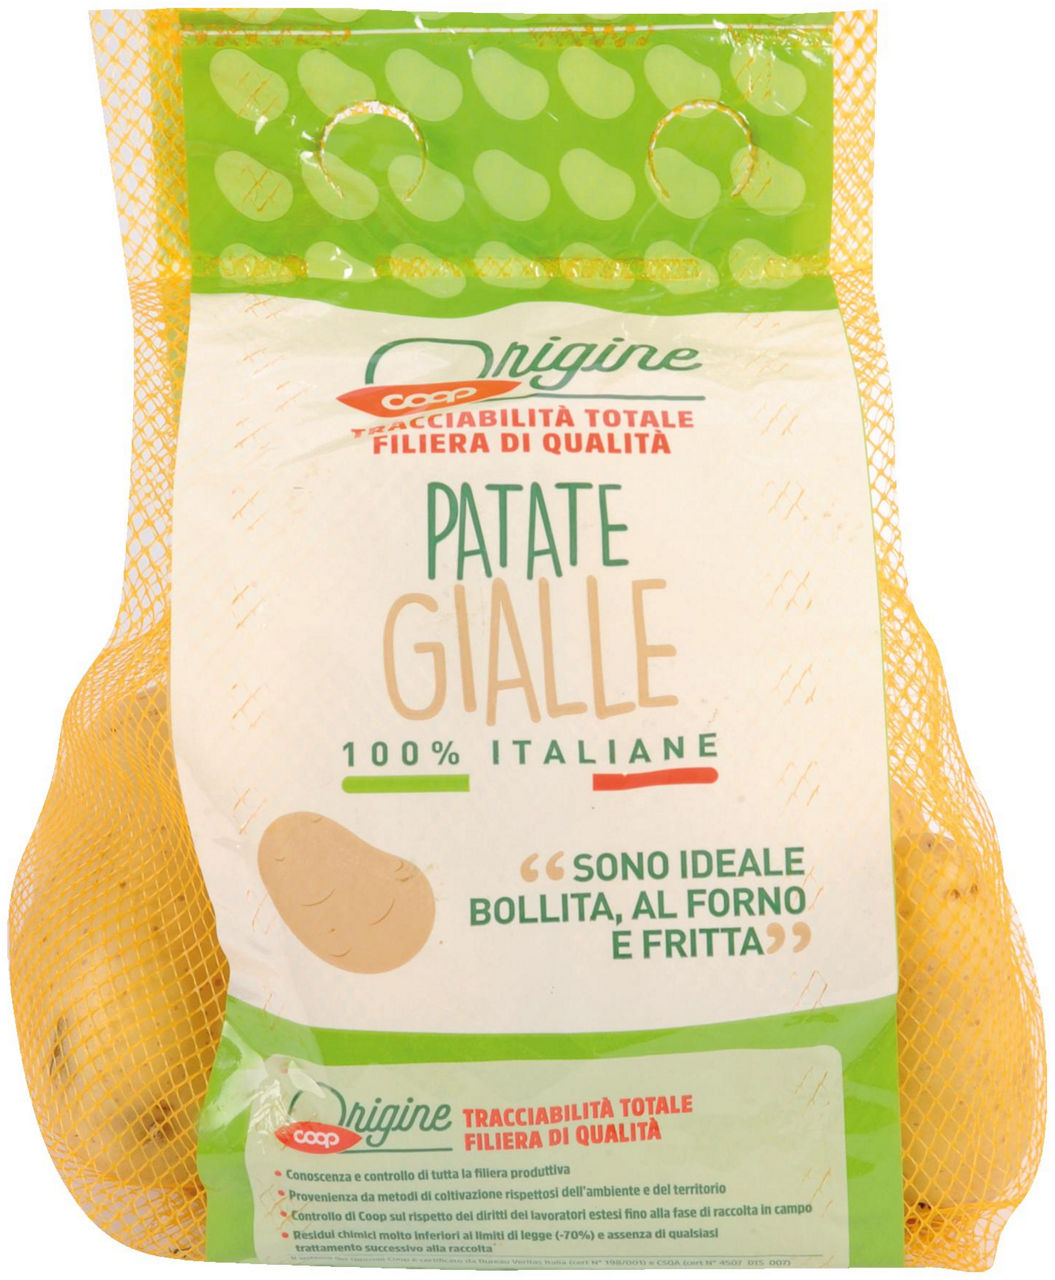 Patate gialle 1,5 kg